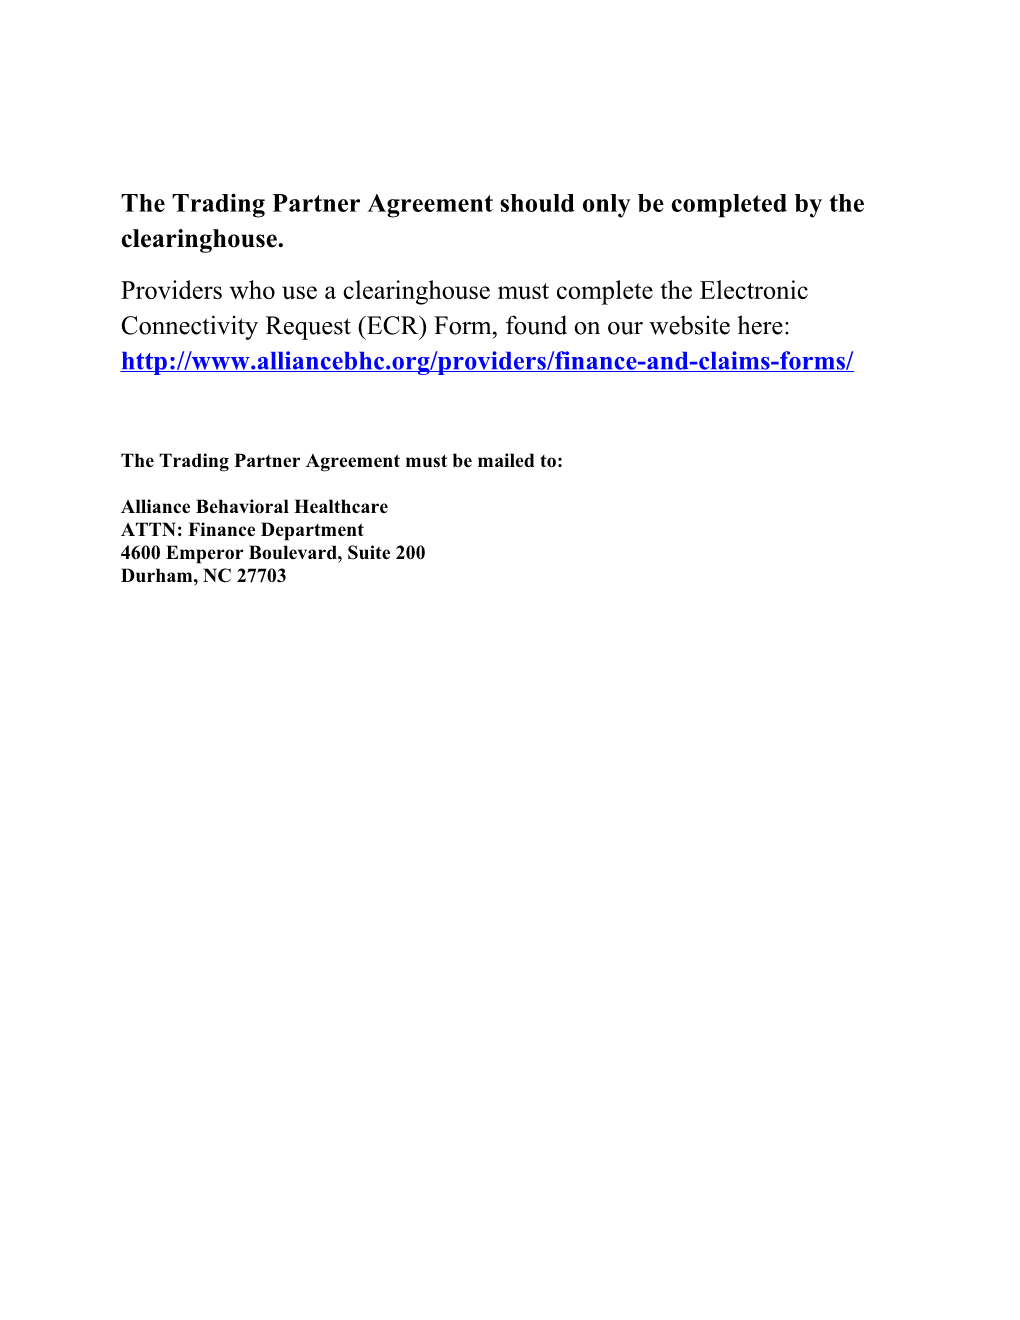 The Trading Partner Agreement Should Only Be Completed by the Clearinghouse